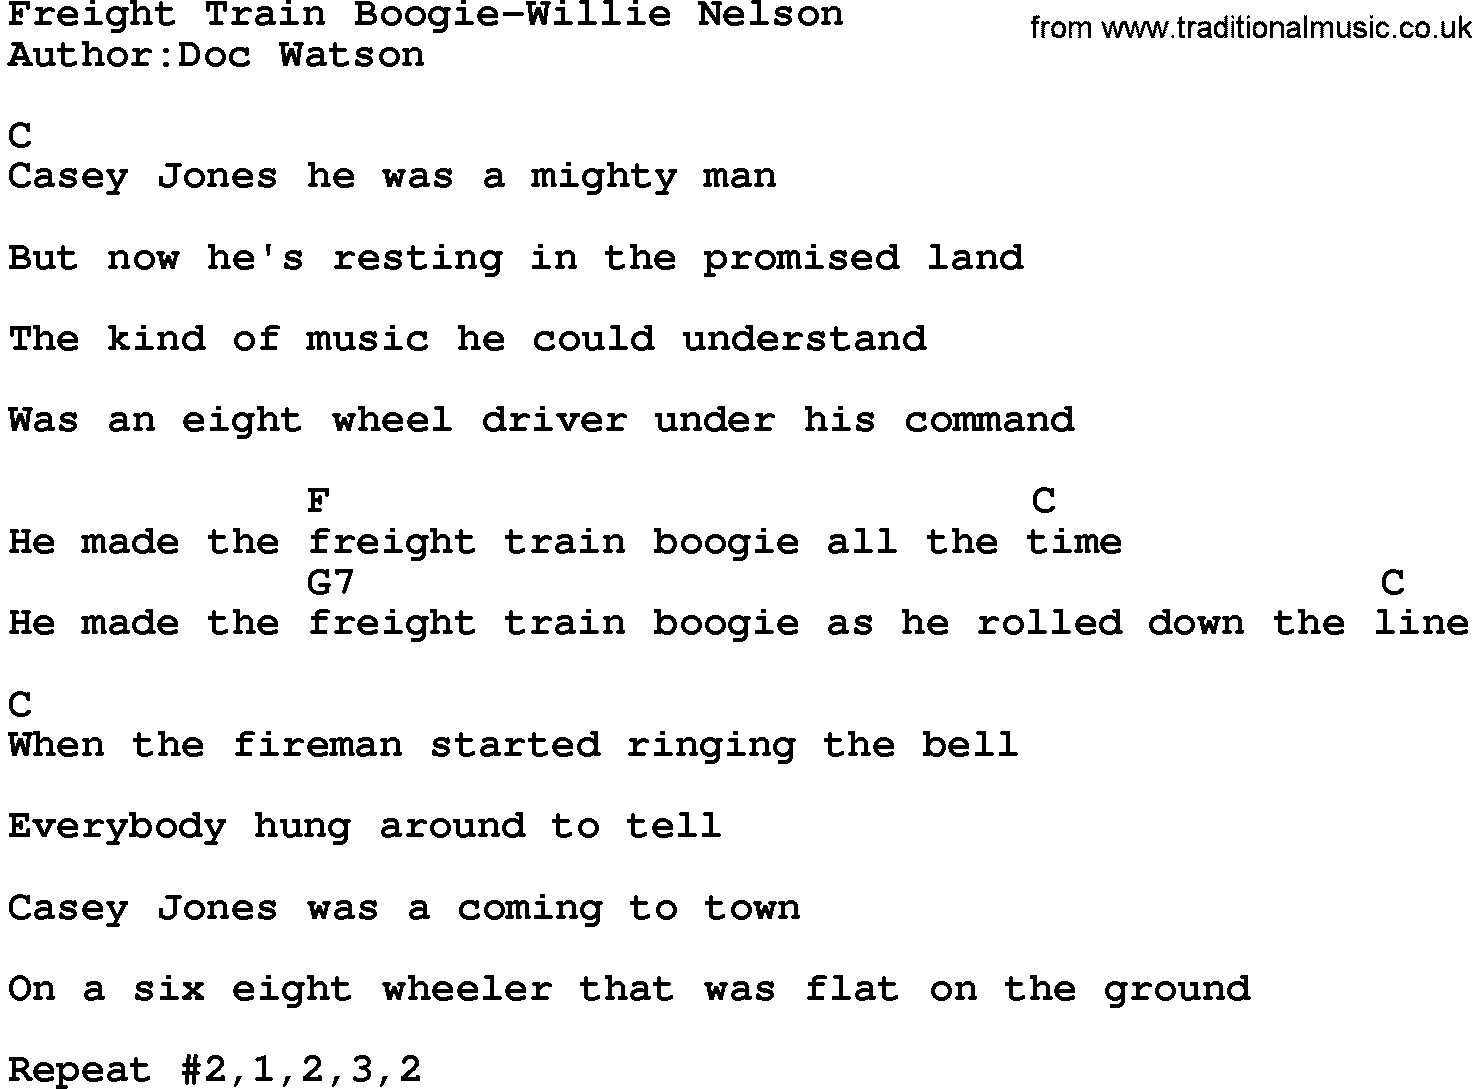 Country music song: Freight Train Boogie-Willie Nelson lyrics and chords